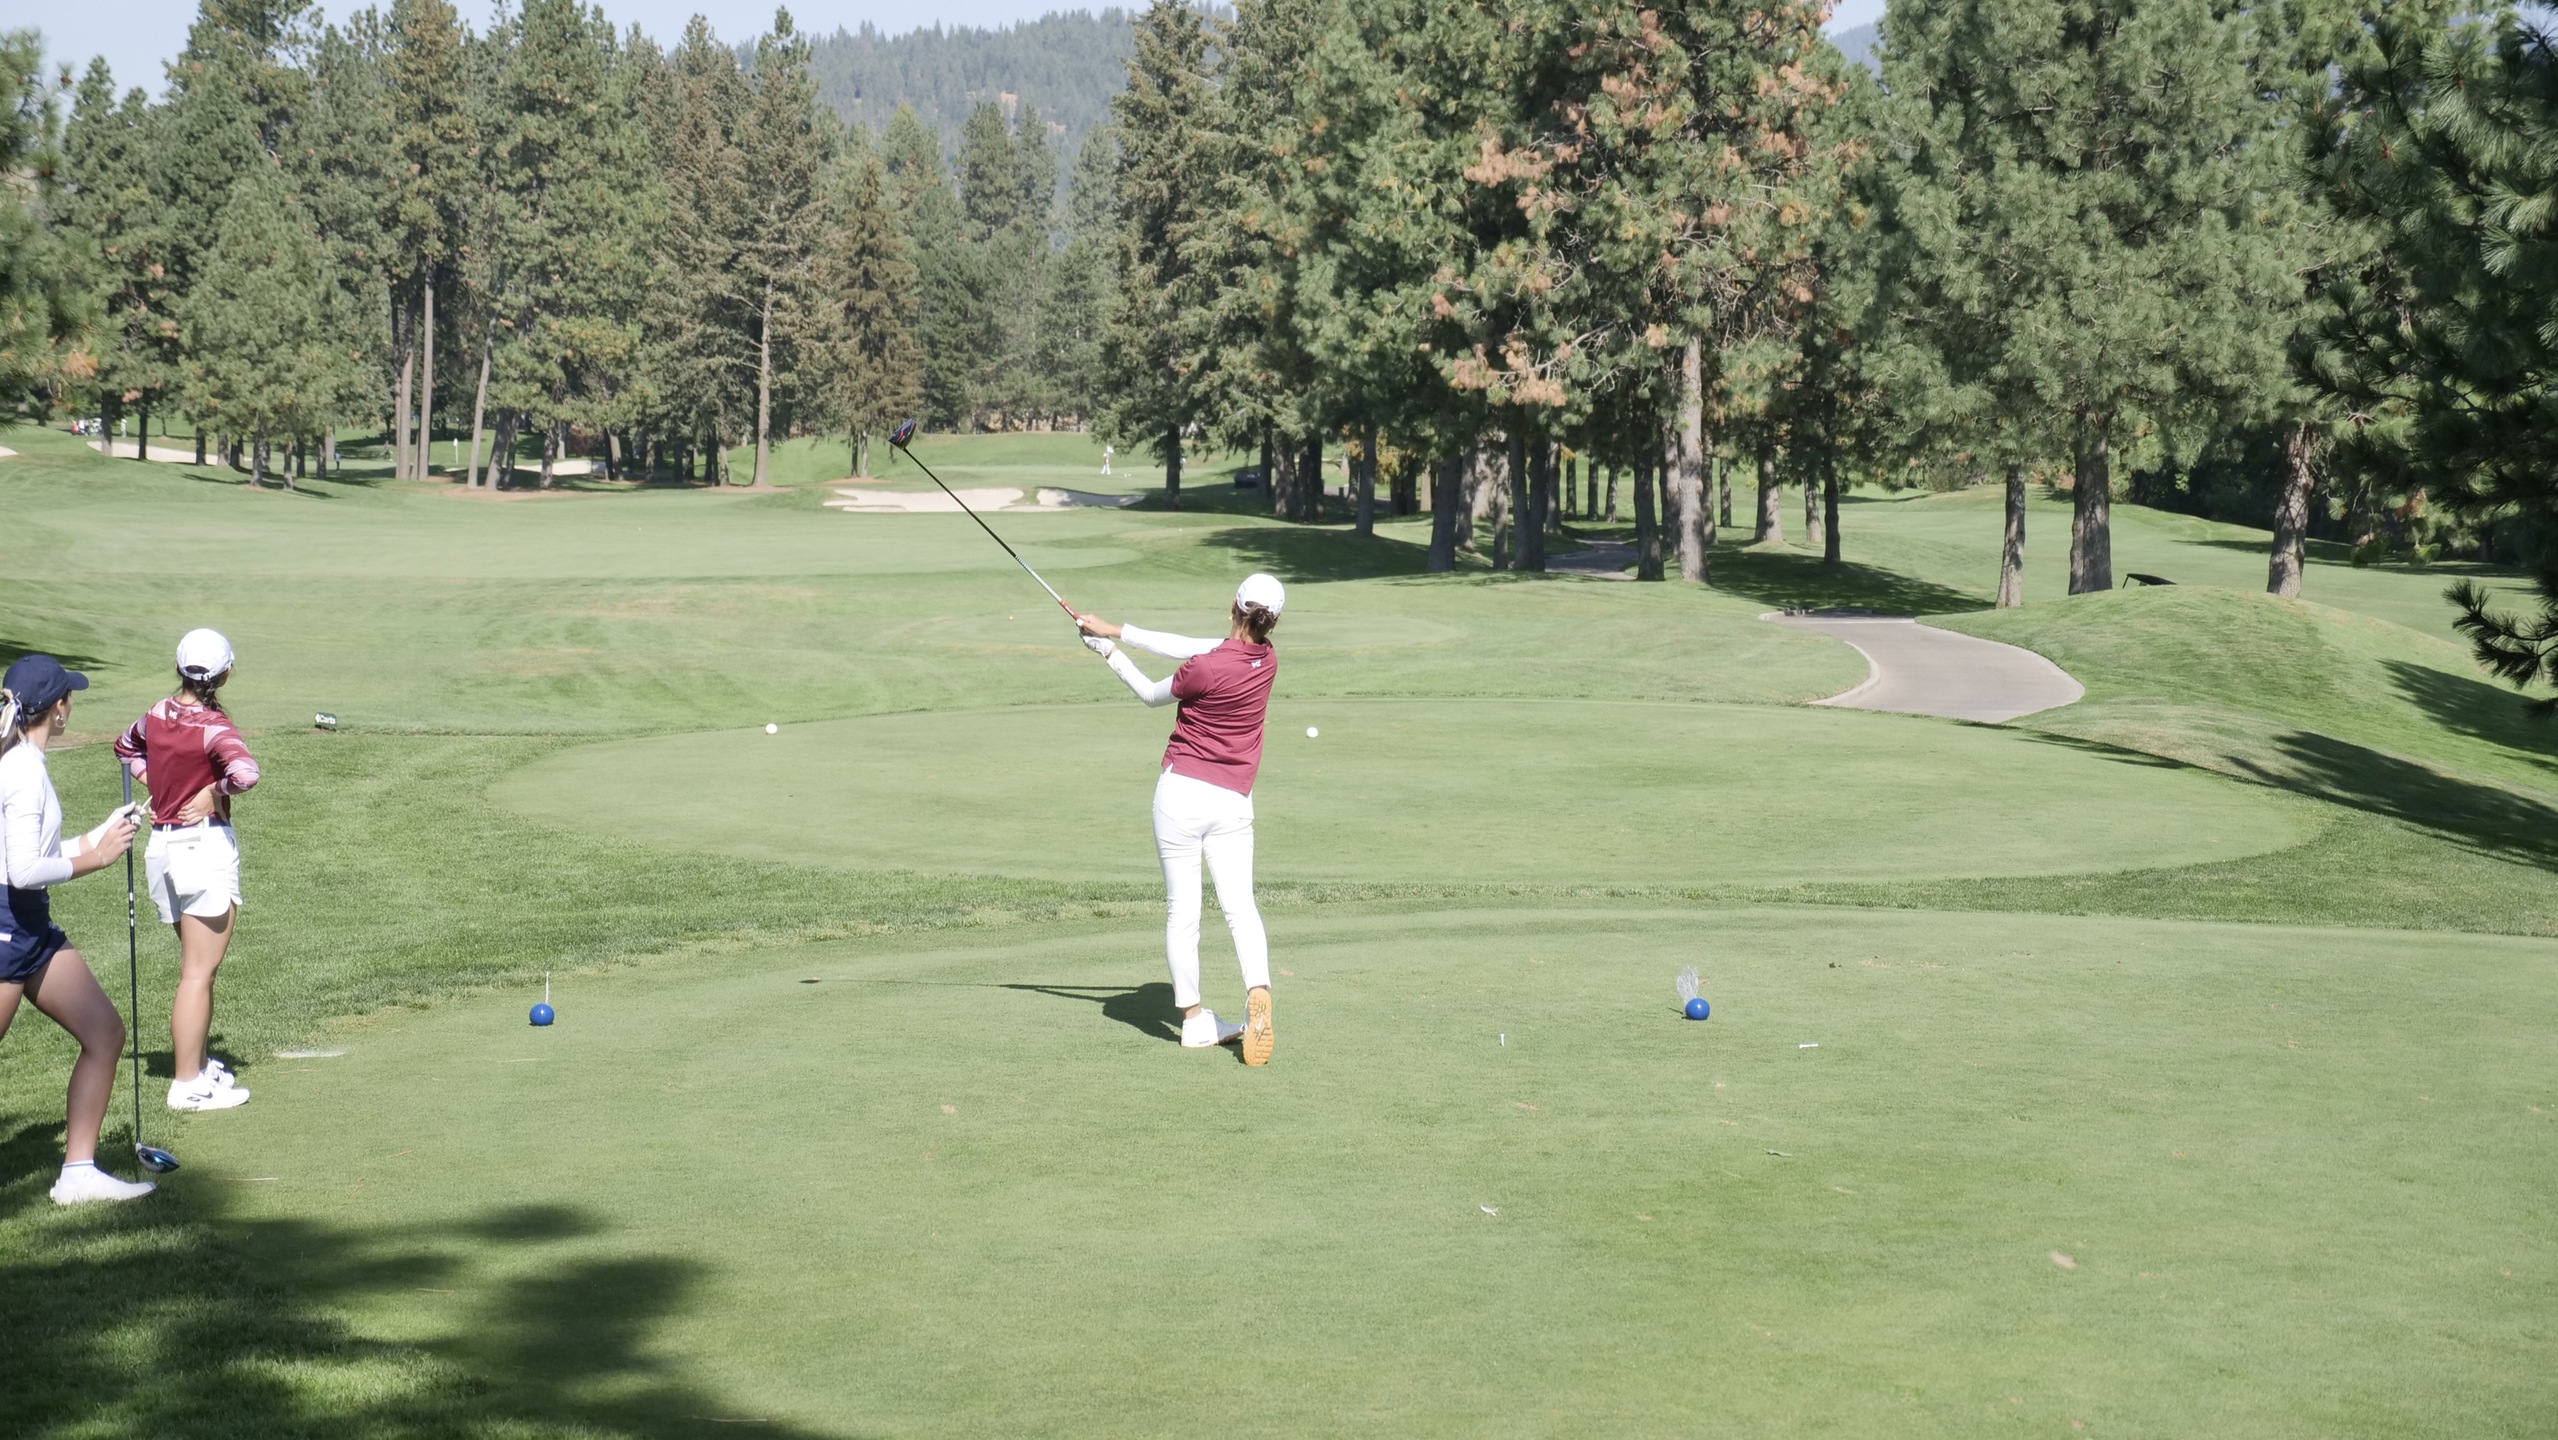 Women's Golf Climbs Two Spots On Final Day Of Coeur d'Alene Collegiate